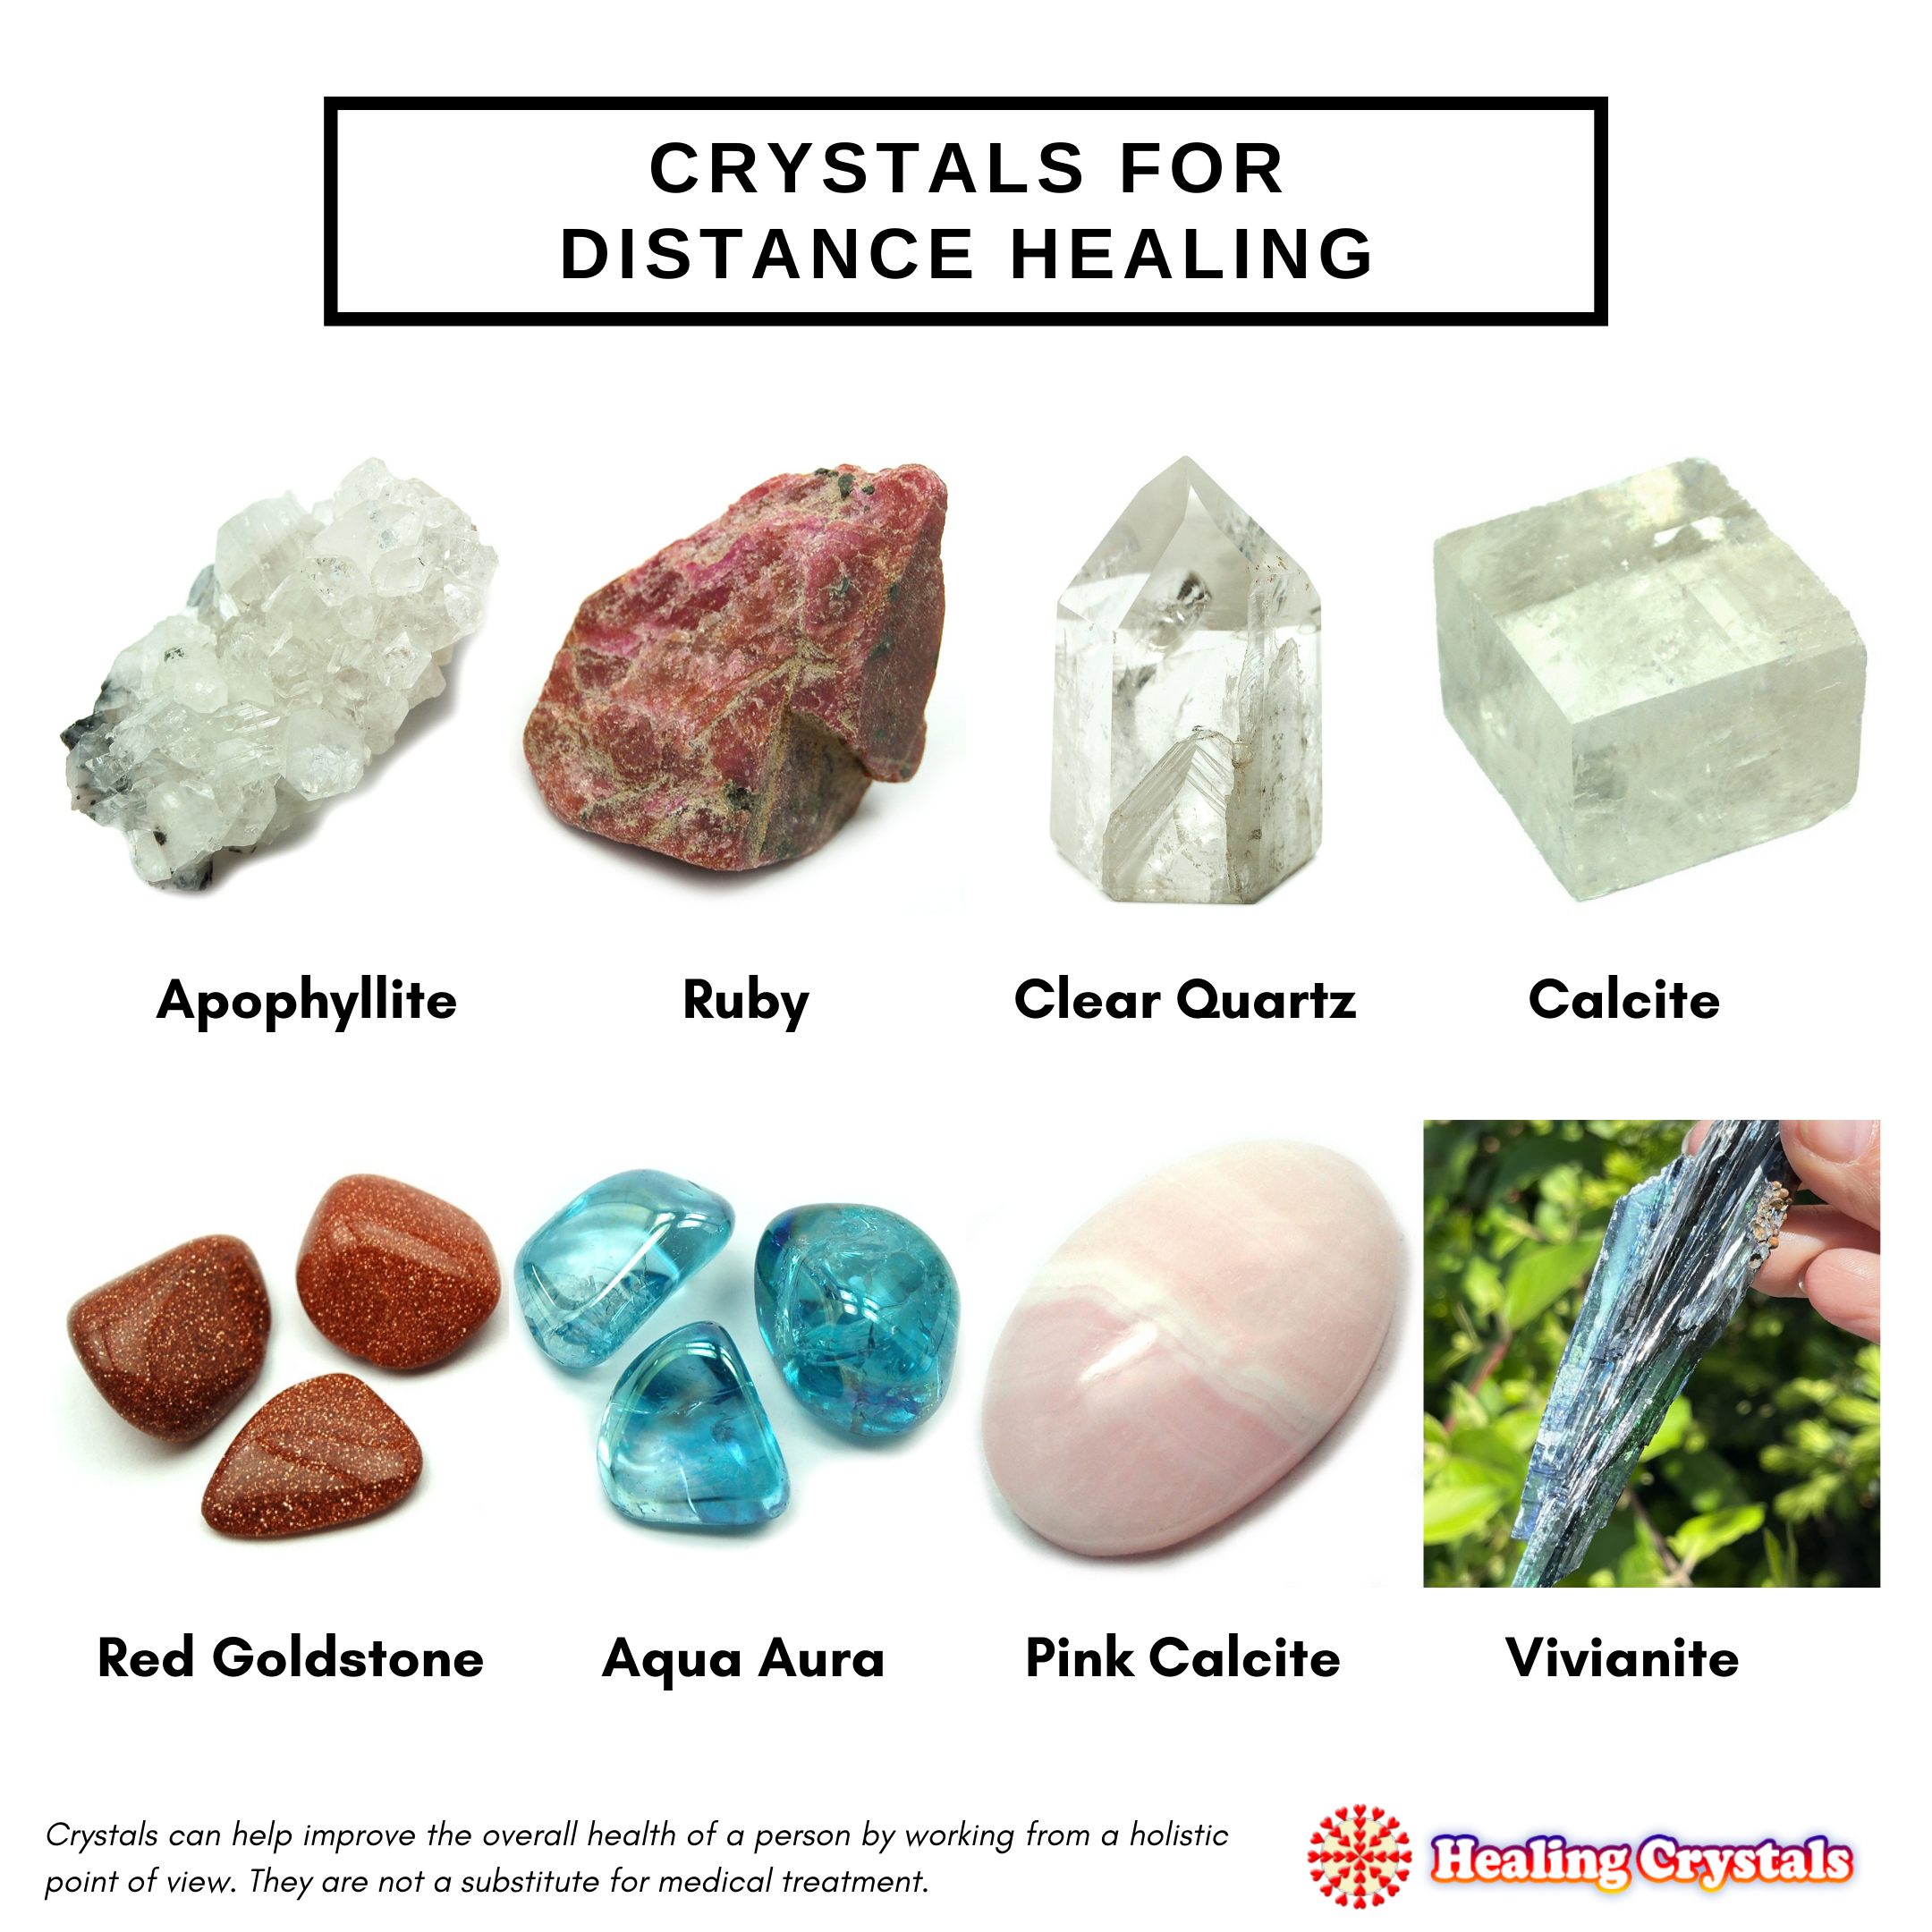 Crystals for distance healing